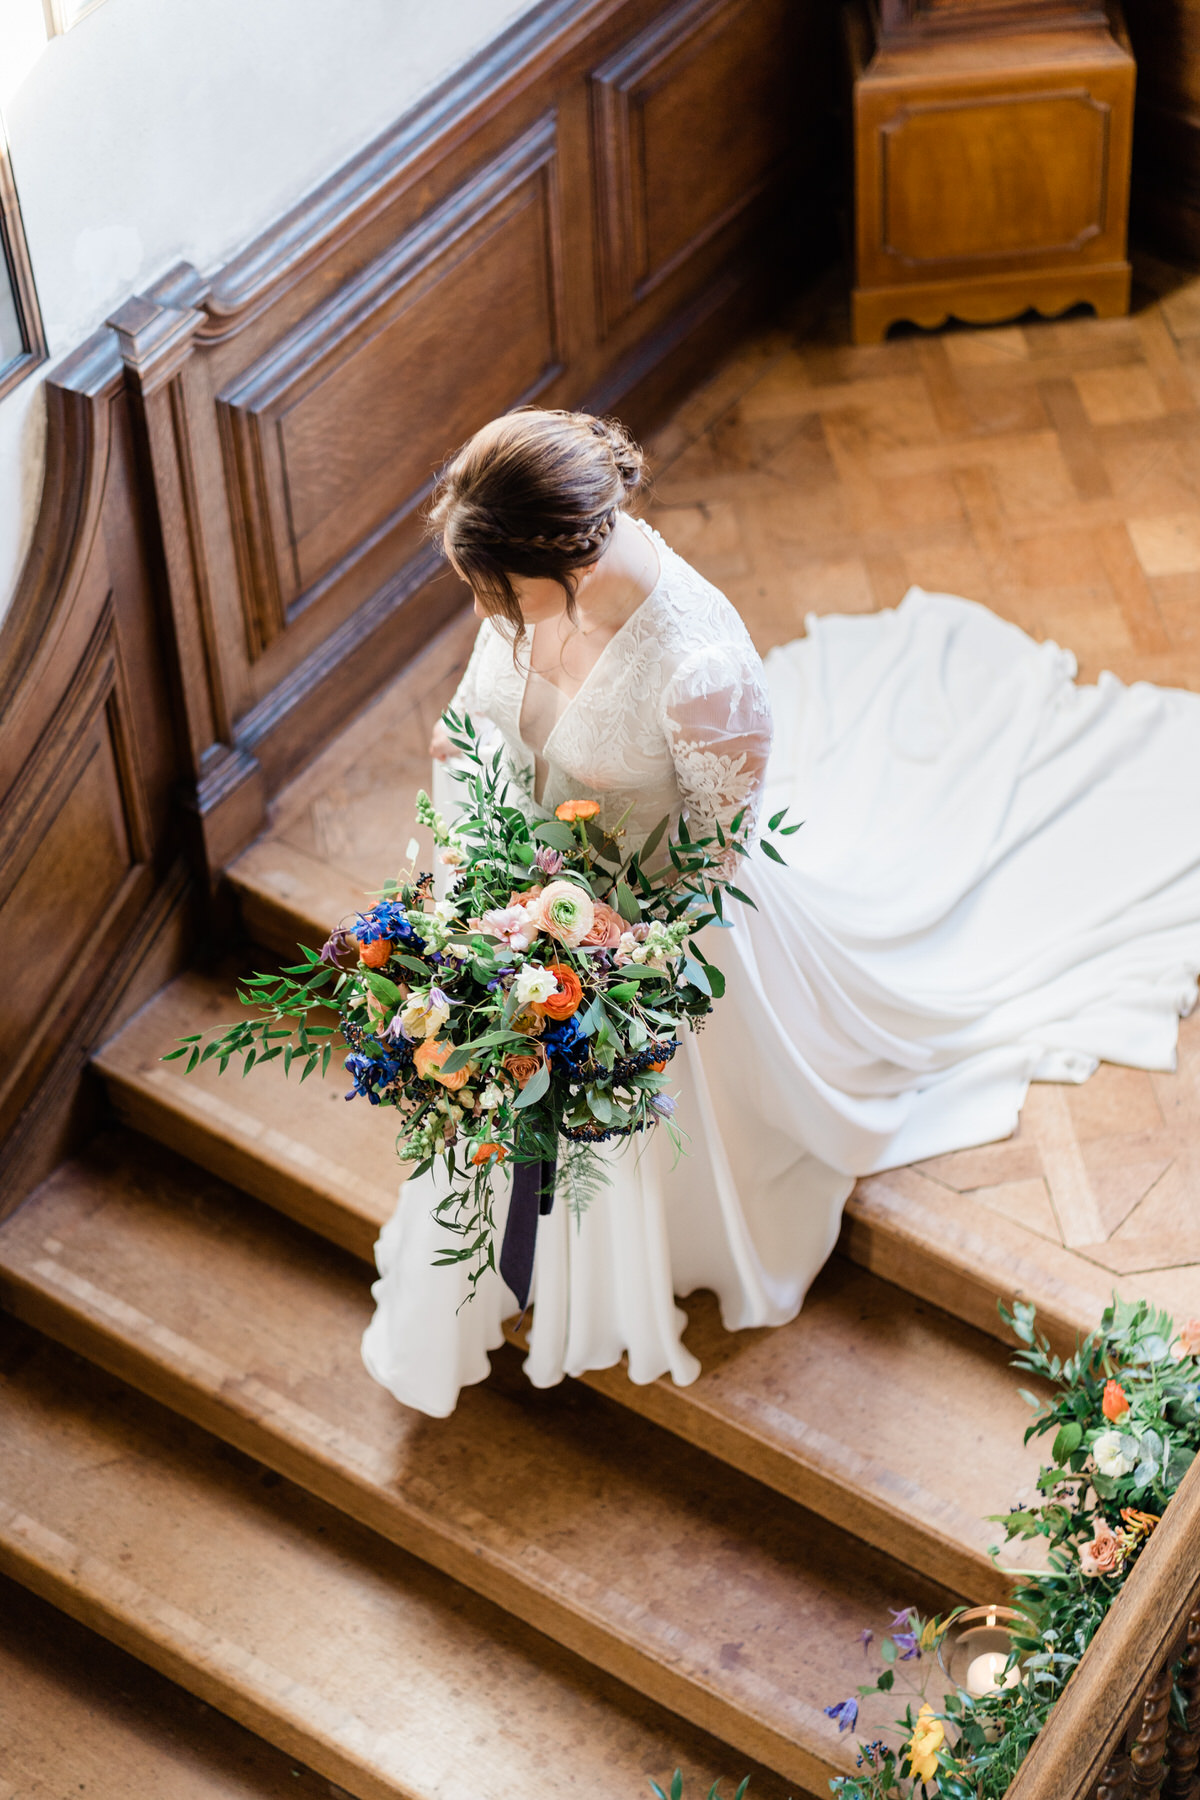 Bridal photo from above on the staircase at Glemham Hall